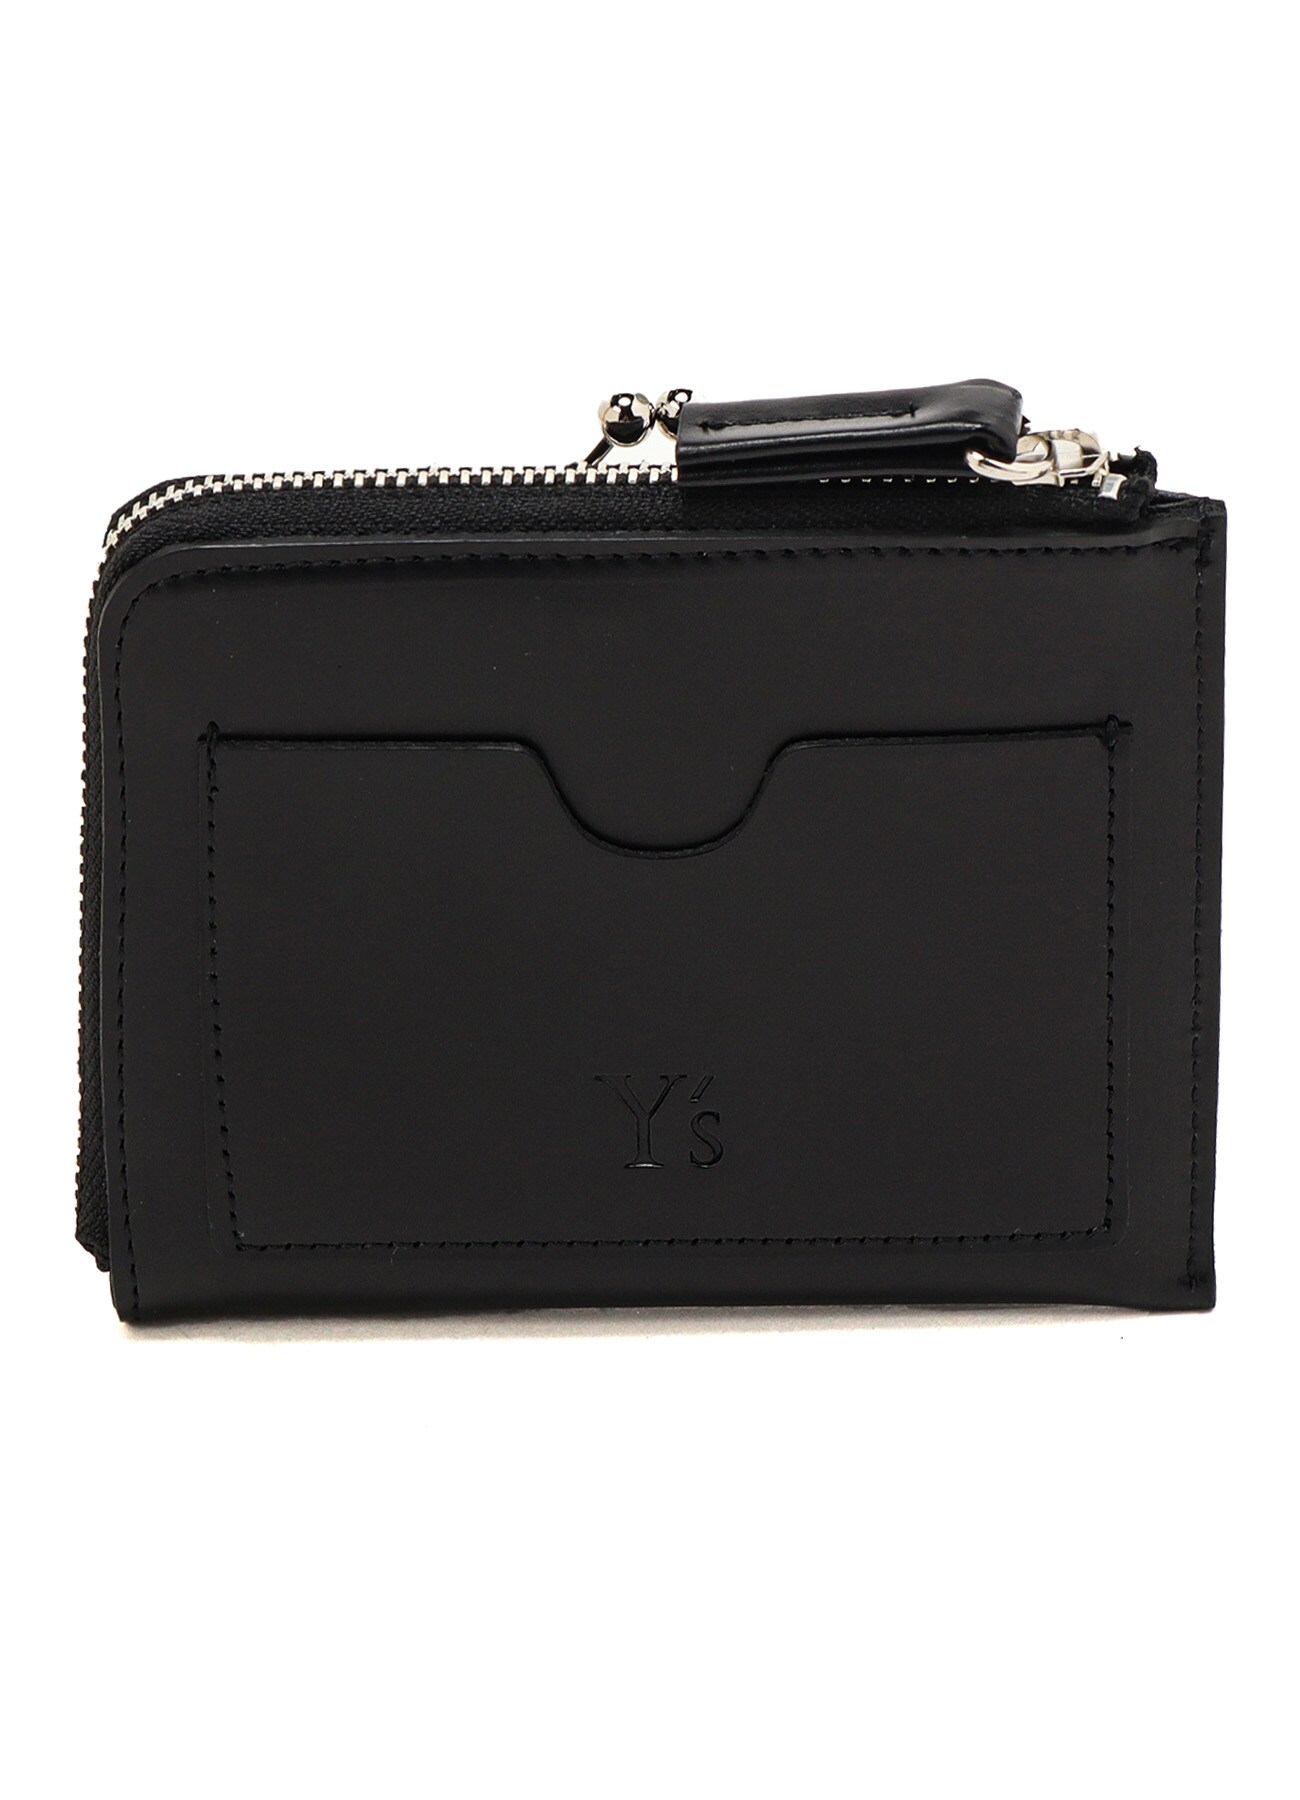 【7/26 12:00(JTS) Release】GLOSSY SMOOTH L-SHAPE WALLET